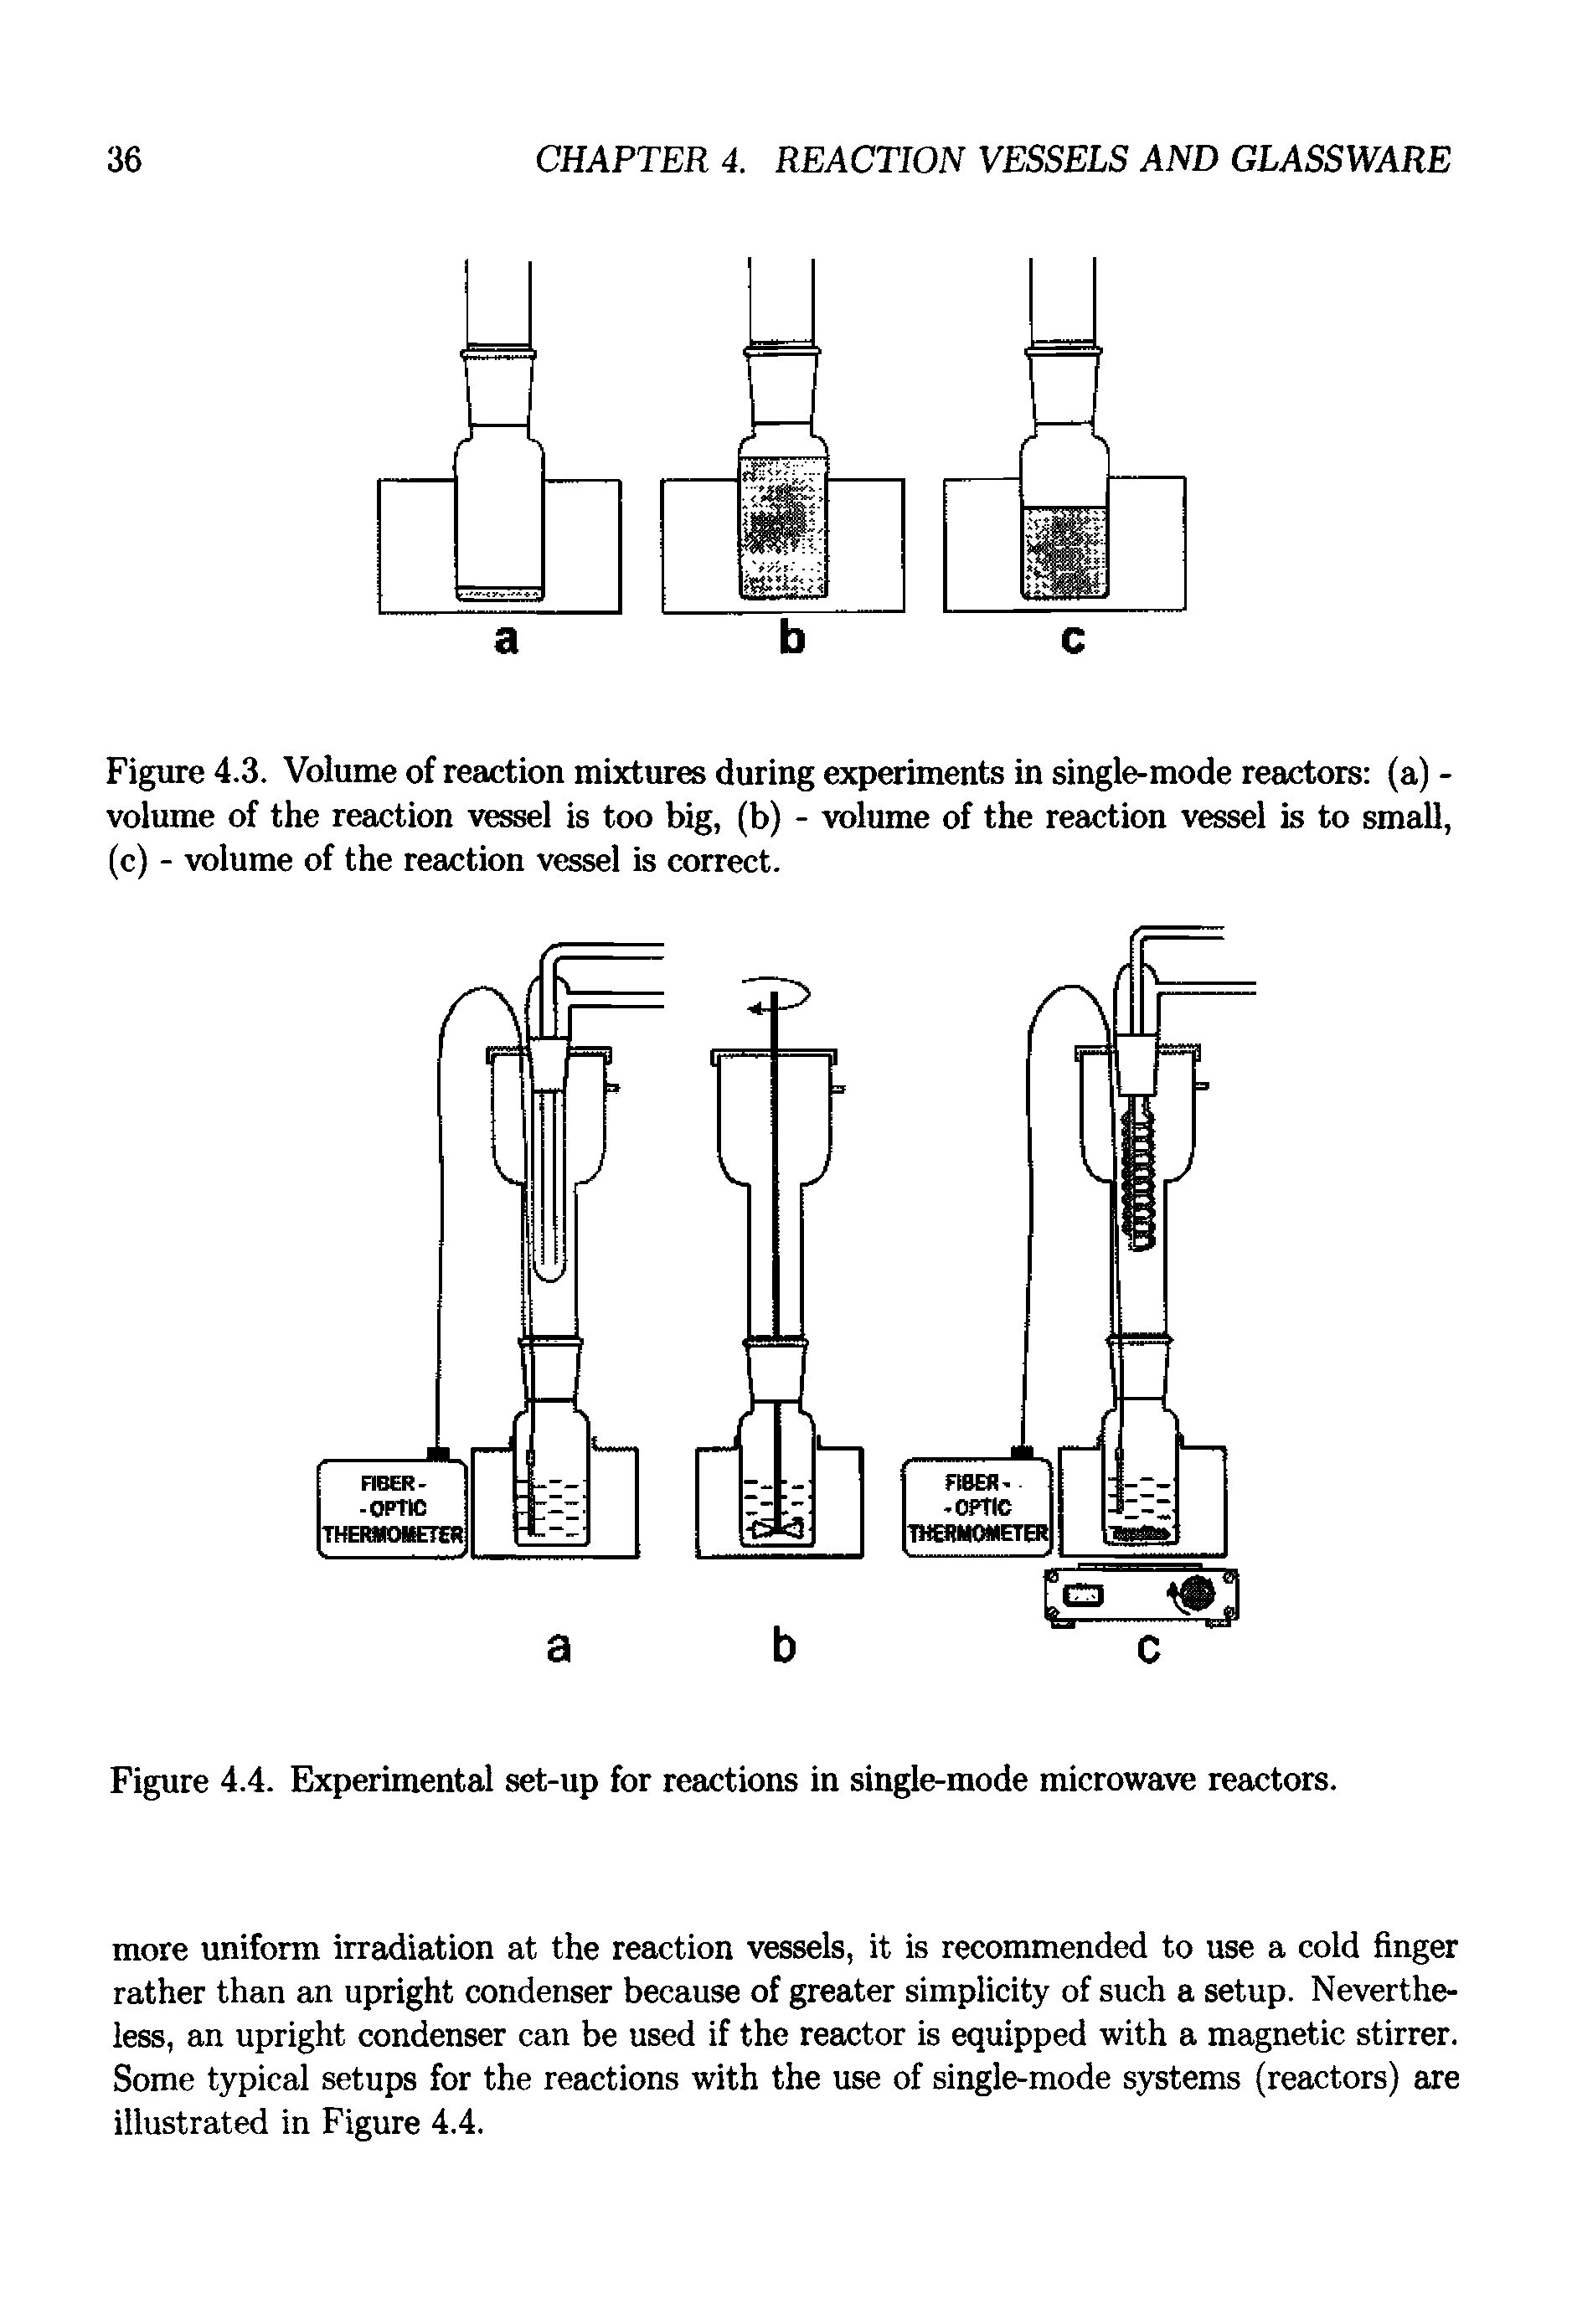 Figure 4.3. Volume of reaction mixtures during experiments in single-mode reactors (a) -volume of the reaction vessel is too big, (b) - volume of the reaction vessel is to small, (c) - volume of the reaction vessel is correct.